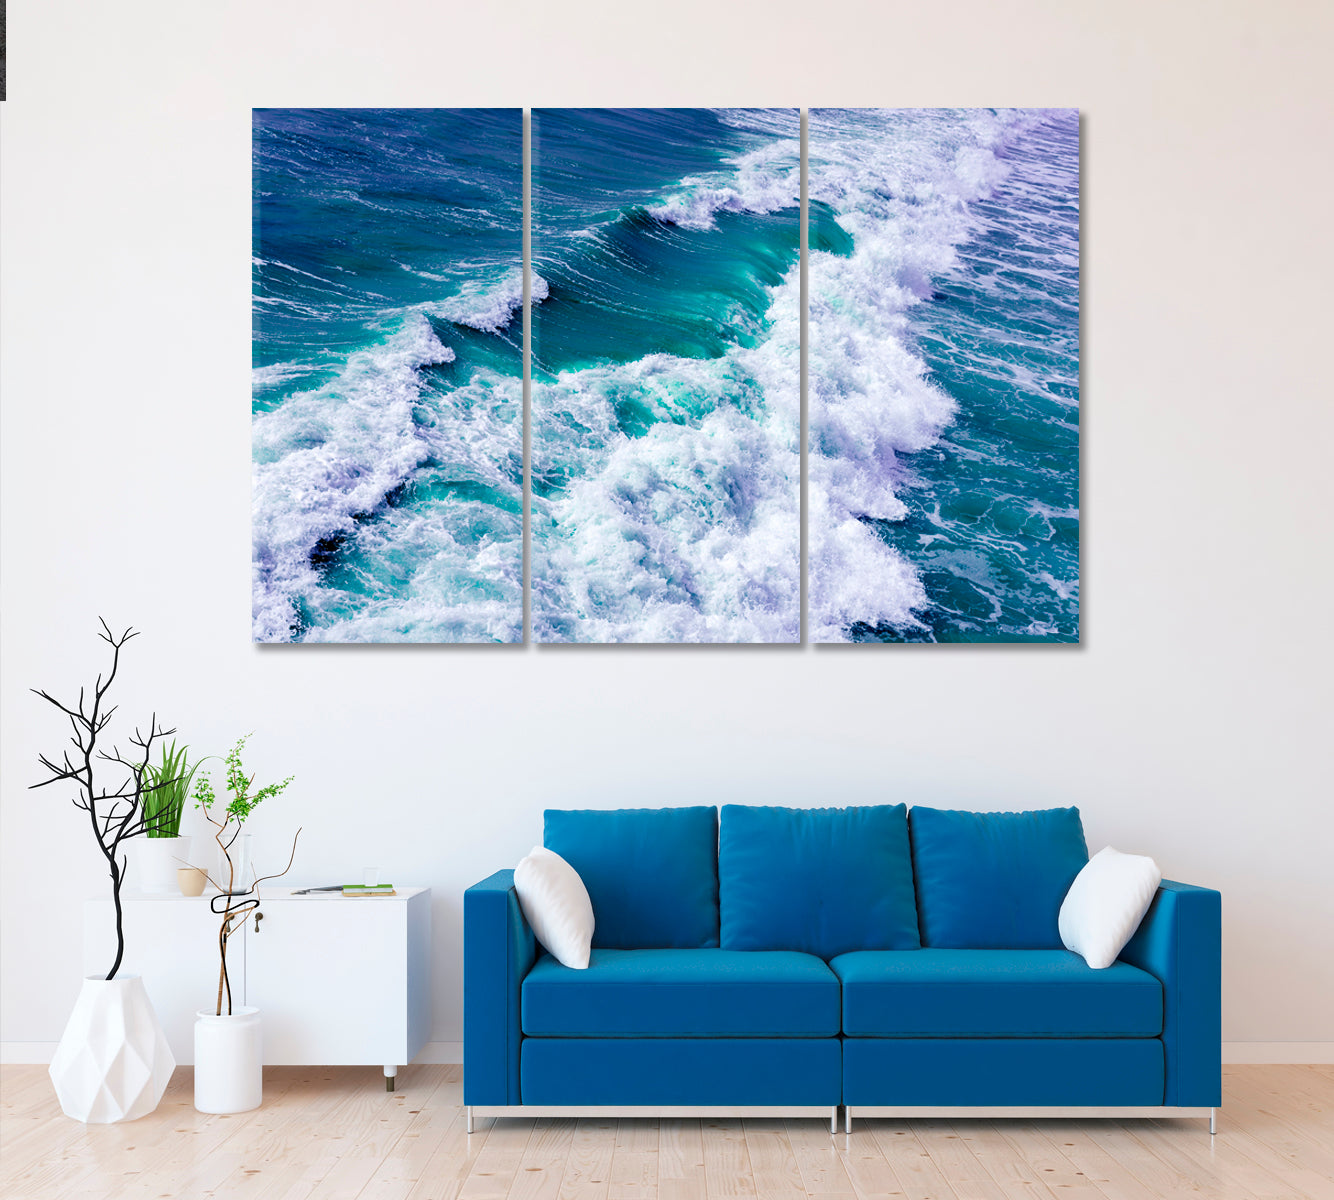 Ocean Waves Canvas Print ArtLexy 3 Panels 36"x24" inches 